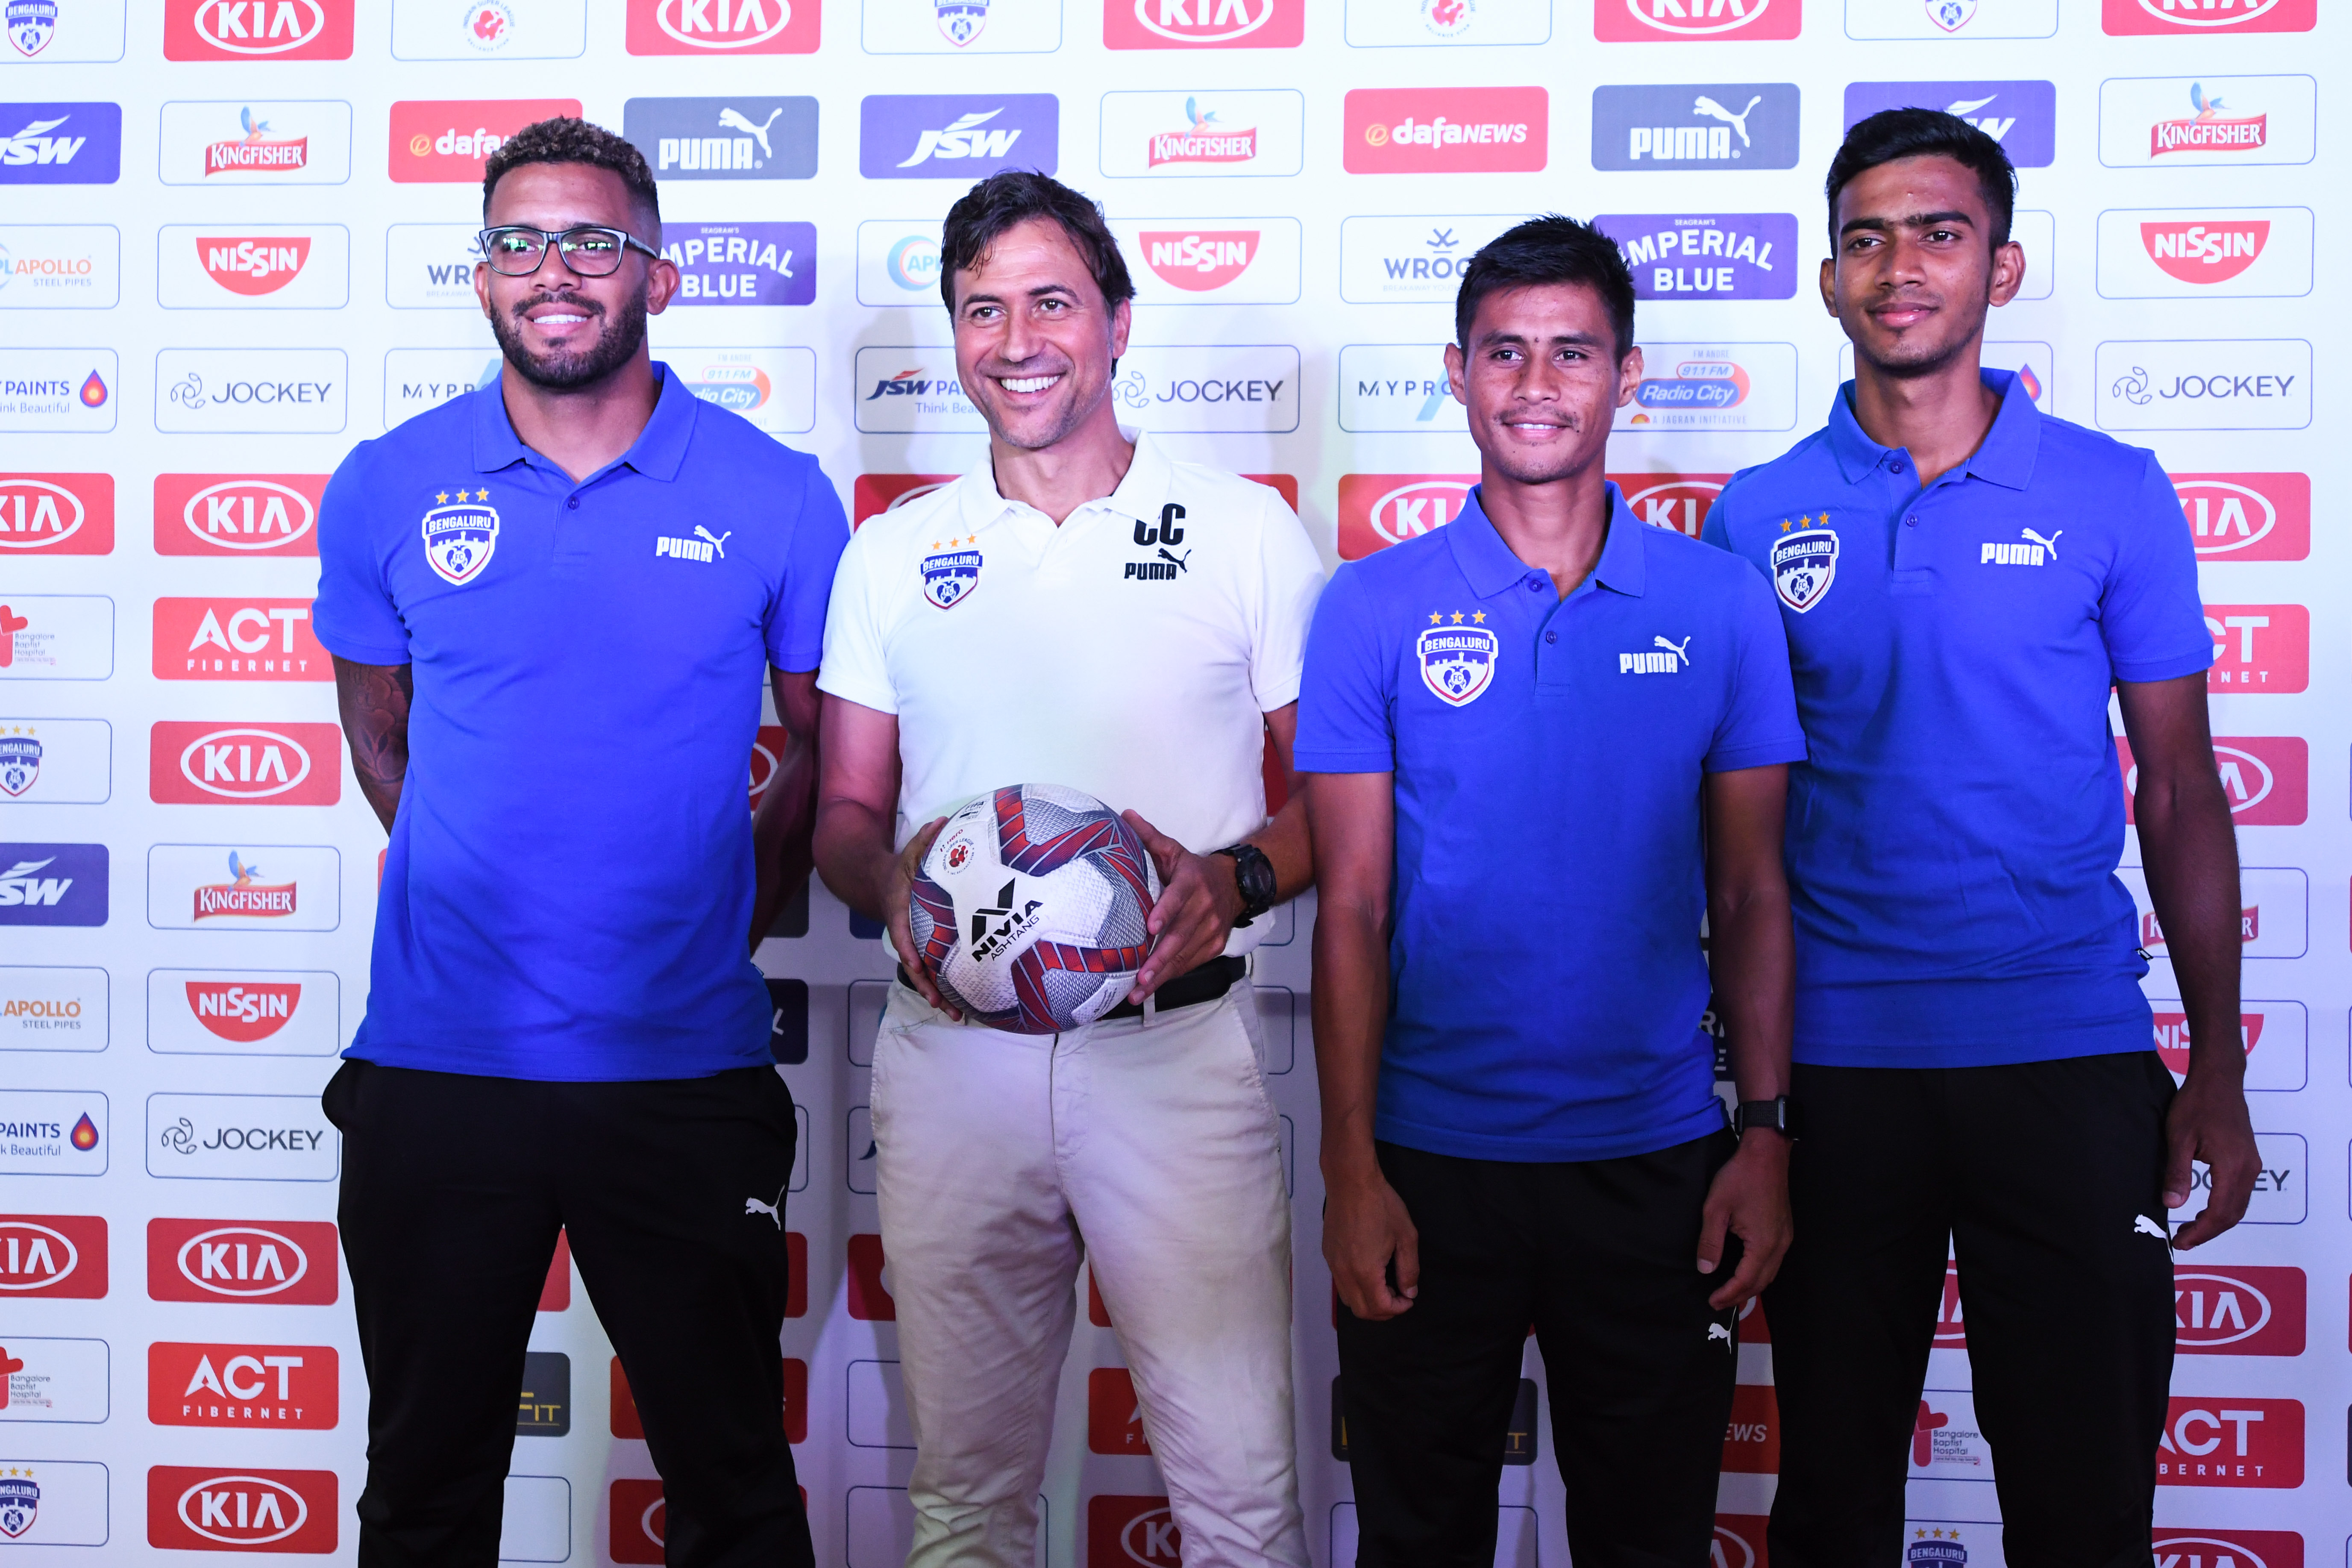 ISL 2019-20 | It was risky to put Ashique and Nishu at back, admits Carles Cuadrat